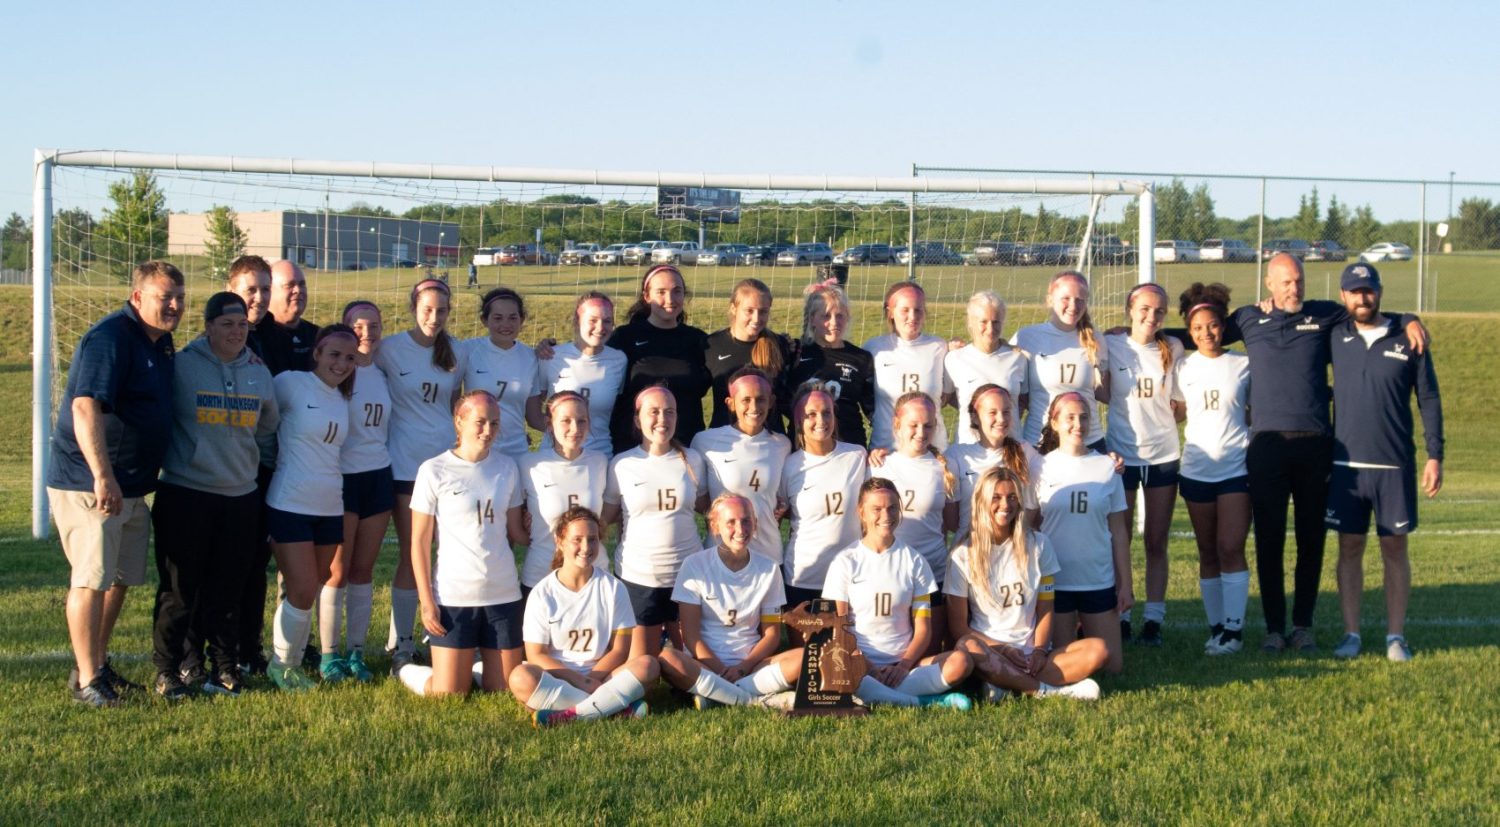 North Muskegon wins Division 4 regional championship, moves on to state soccer semifinals